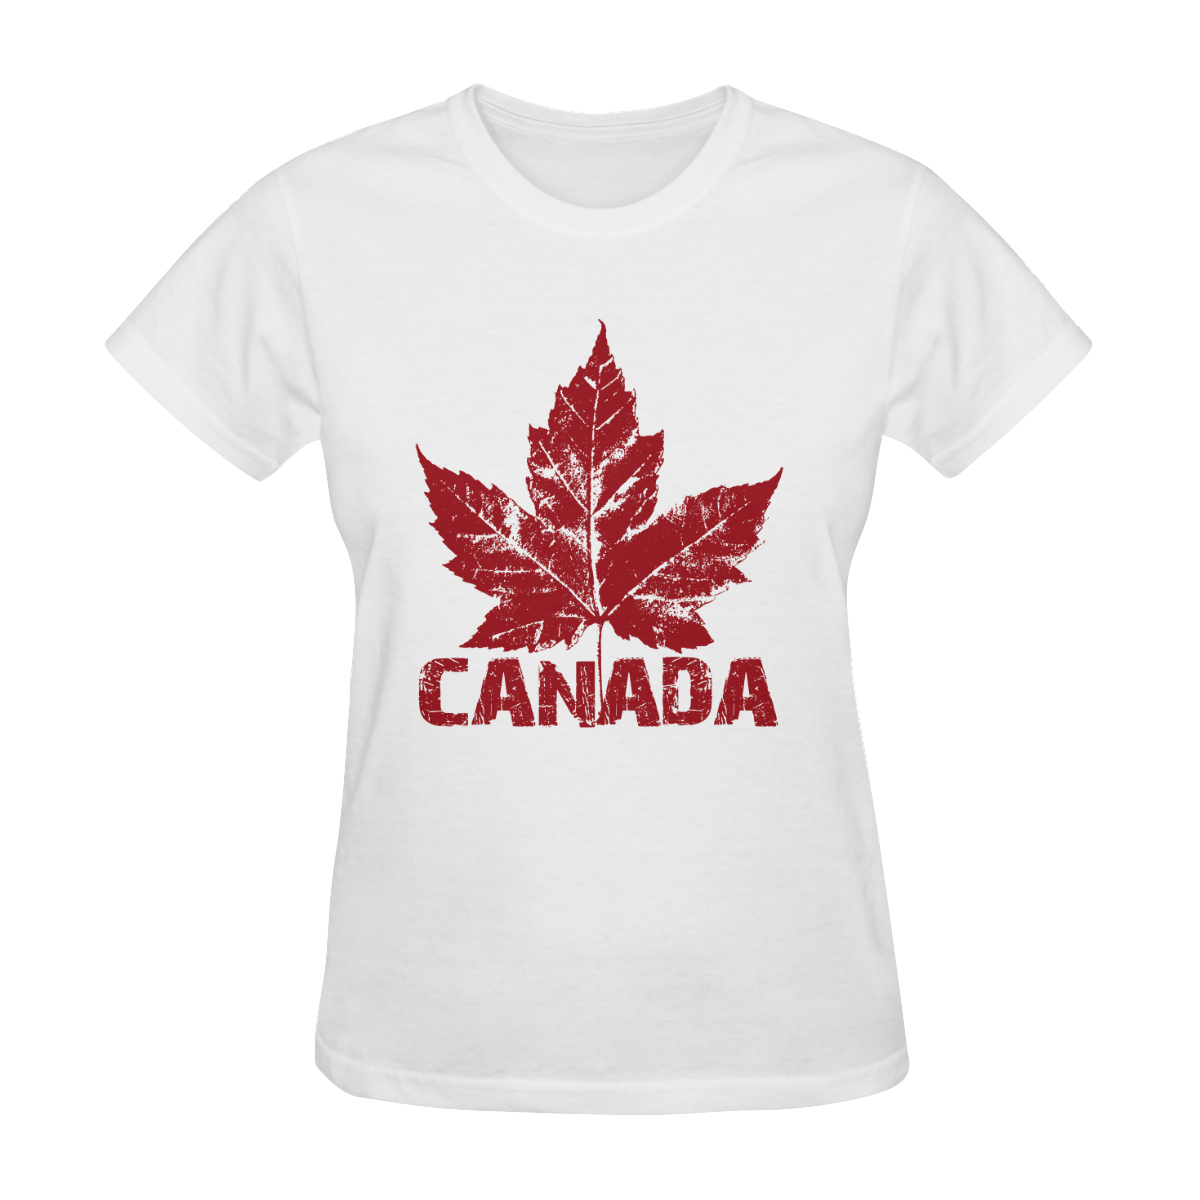 Cool Canada Souvenir T-shirts - AU Women's T-Shirt in USA Size (Two Sides Printing)